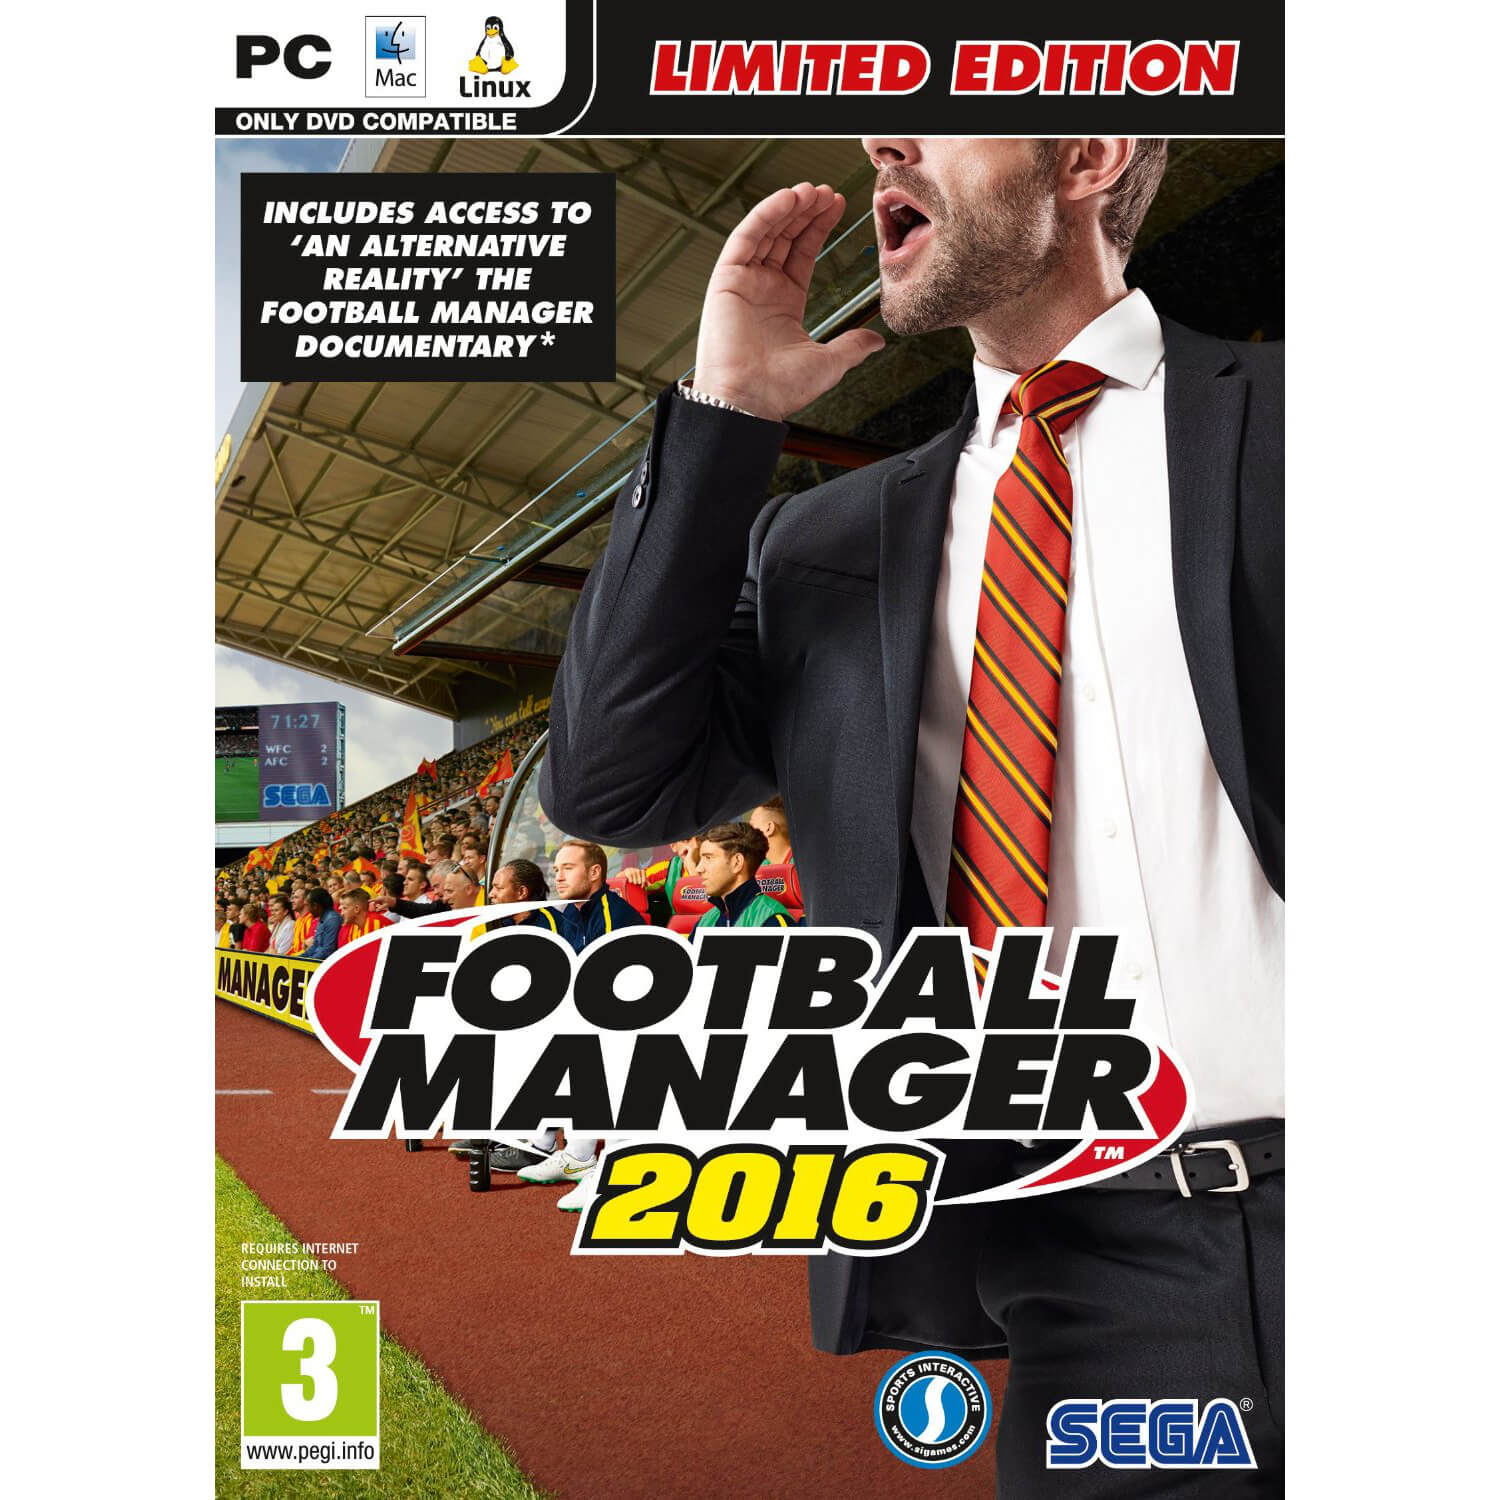  Joc PC Football Manager 2016 Limited Edition 